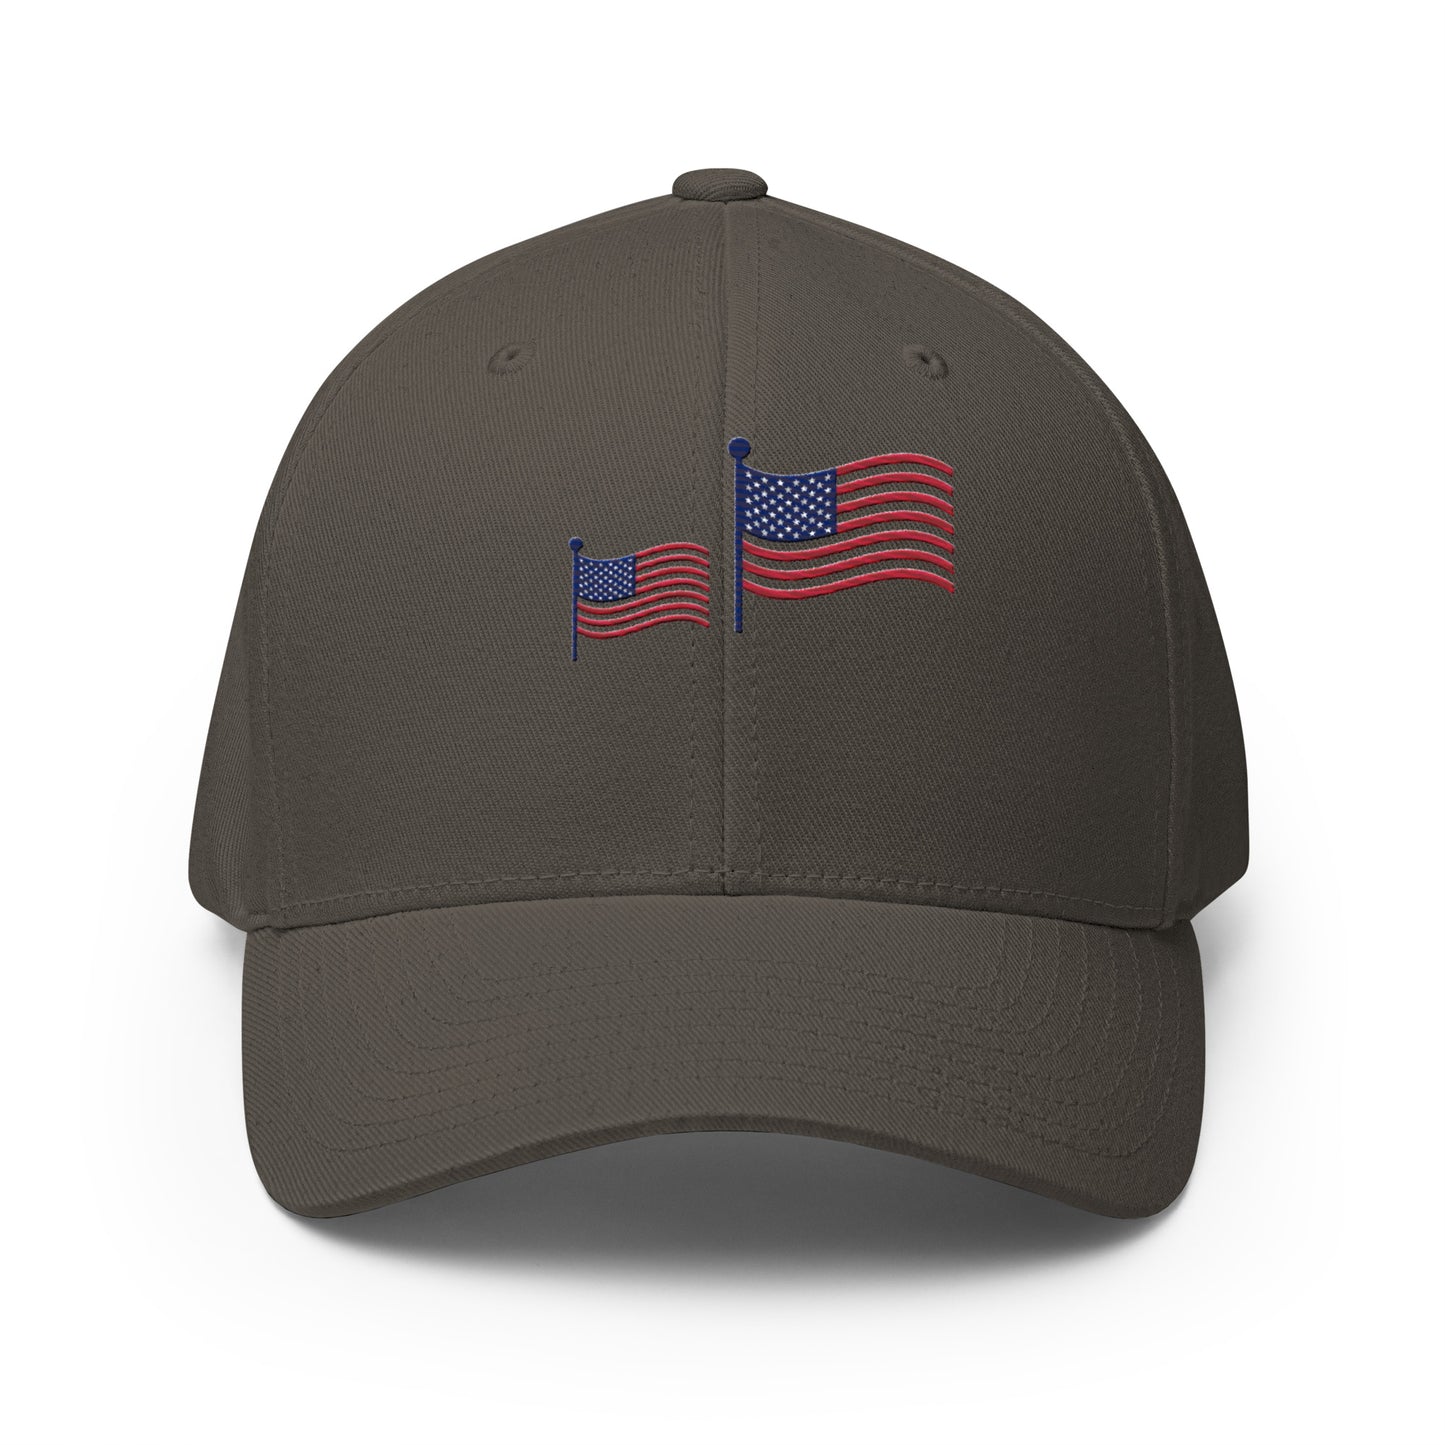 Baseball Cap with Independence Day Symbol